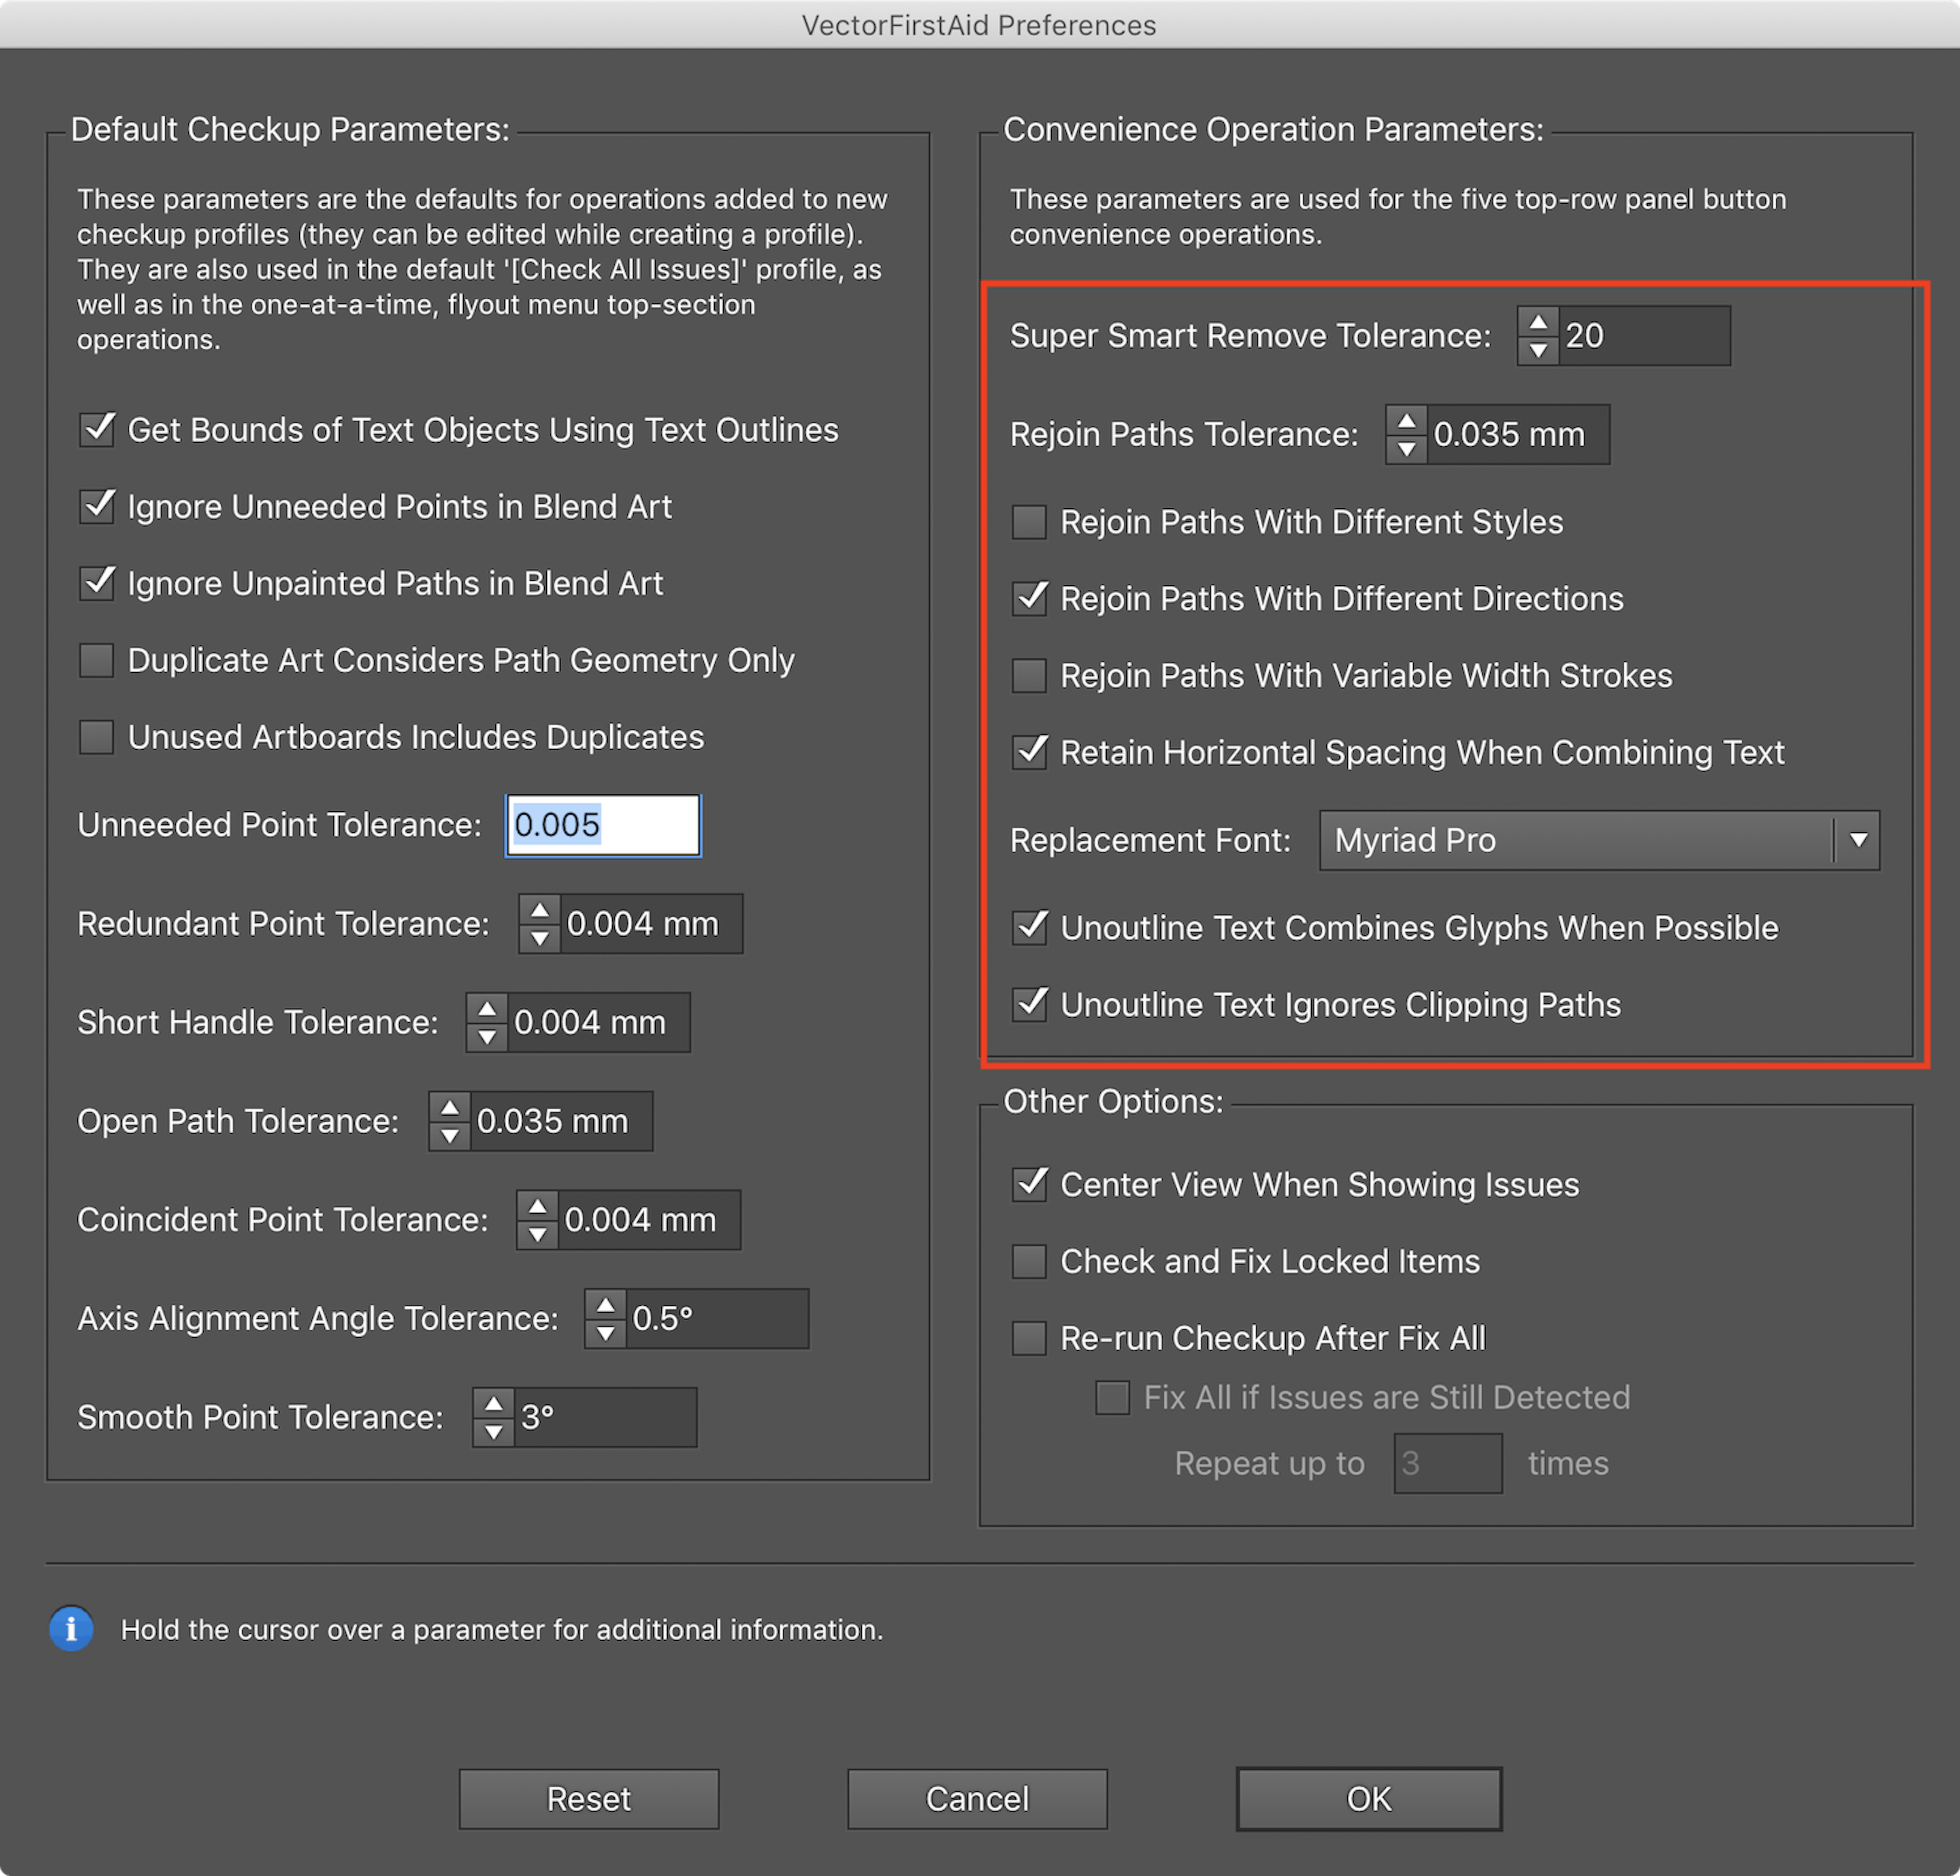 how to find and download missing fonts to illustrator